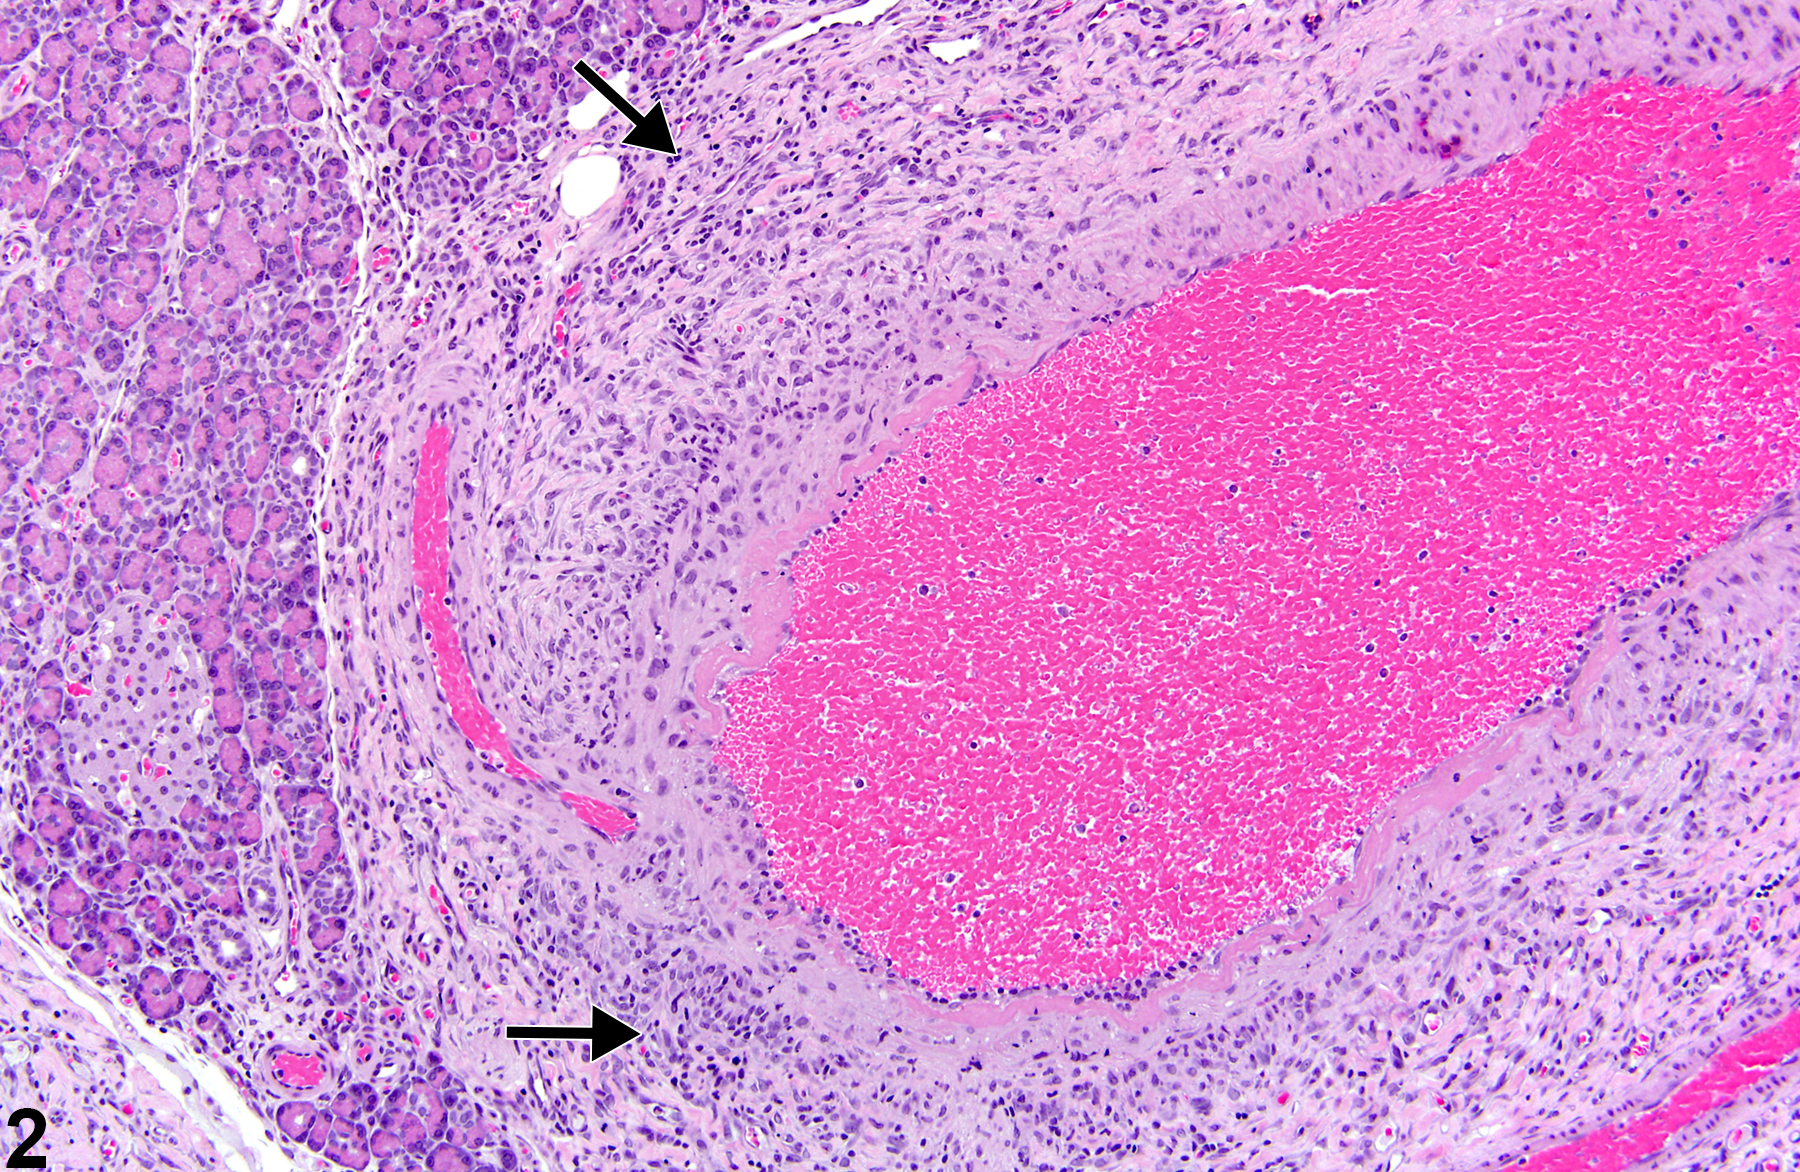 Image of polyarteritis nodosa in the pancreas from a male B6C3F1/N mouse in a chronic study